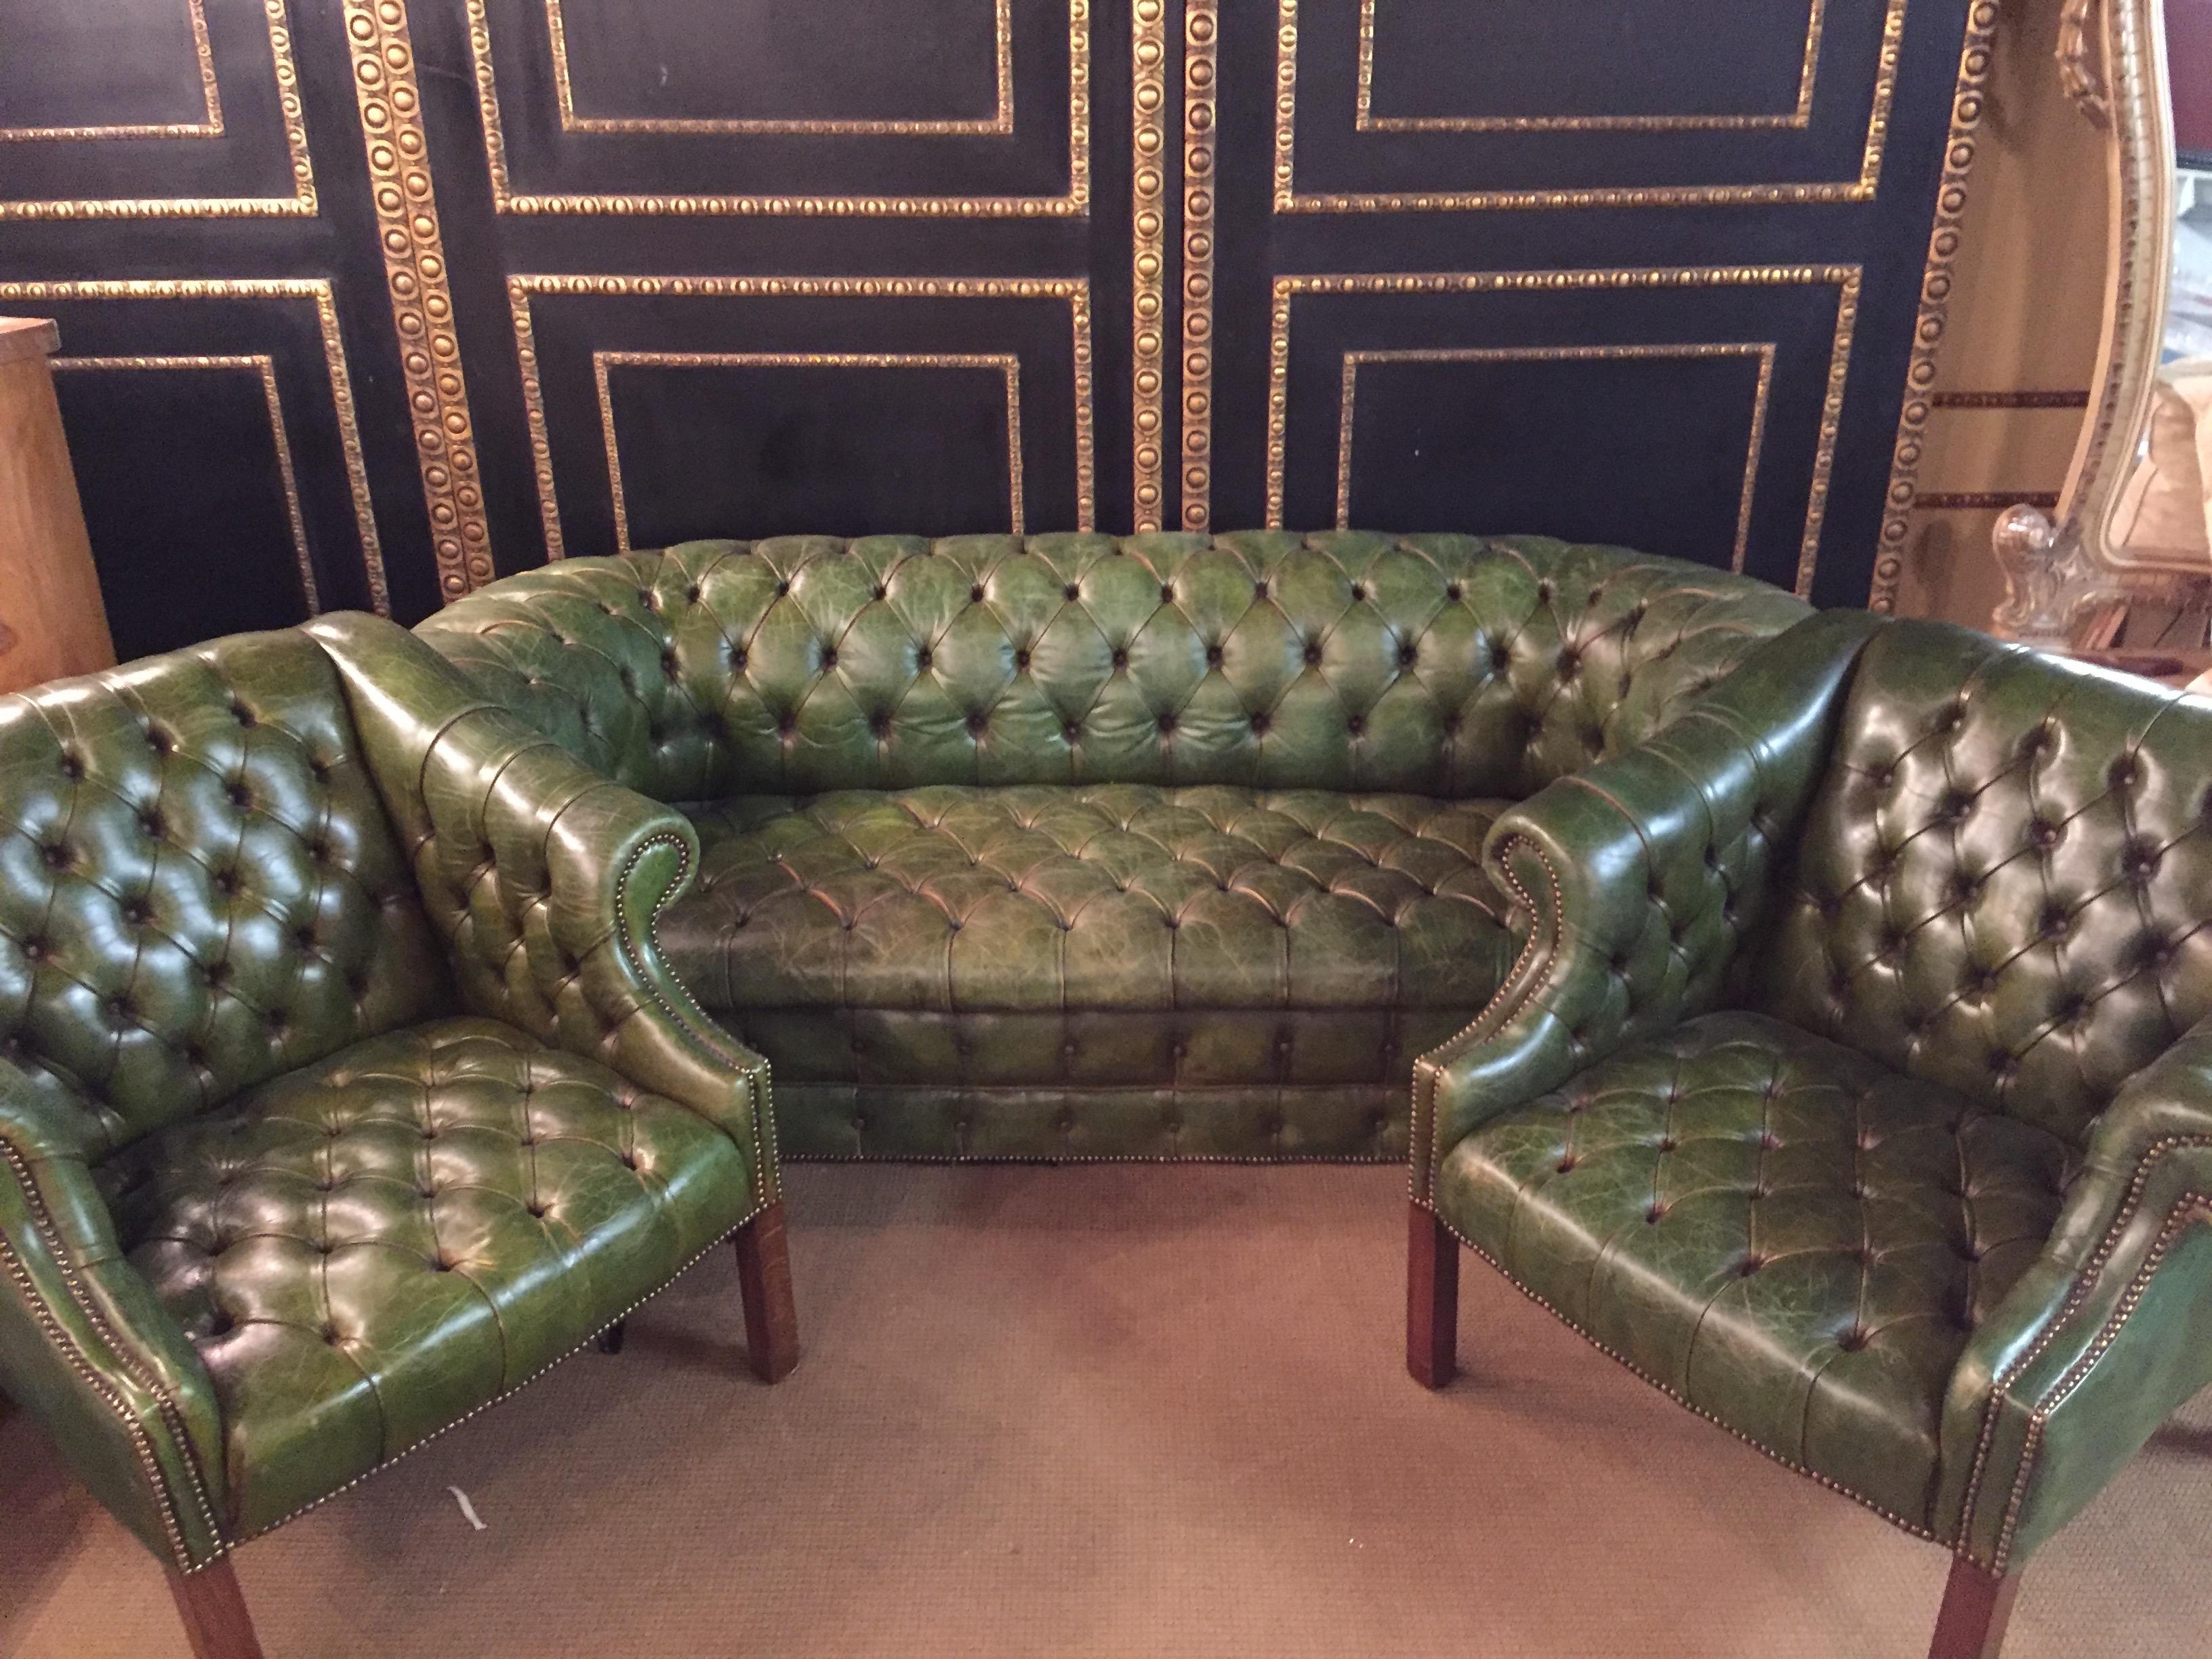 Original old Chesterfield set, quilted seat and back strong Leather.
This unique set was bought in an antique shop in 1978, real leather with original invoice.
Colour is faded green, the inside is filled with horsehair,
seats are with classic laced